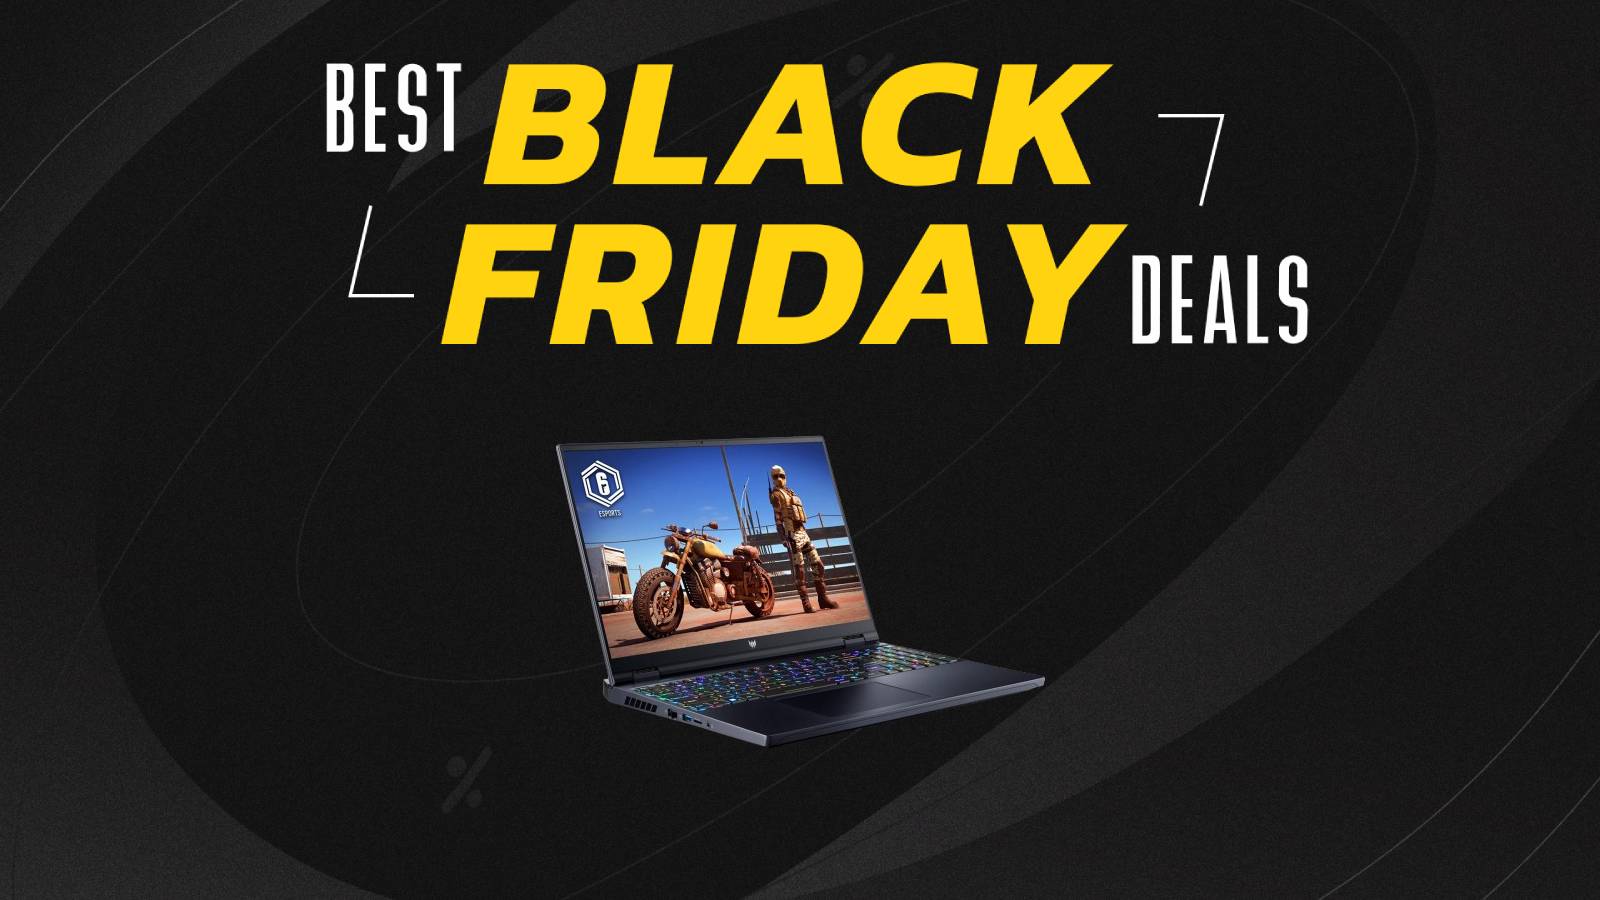 Acer RTX 4070 gaming laptop Black Friday deal slices $500 off price tag